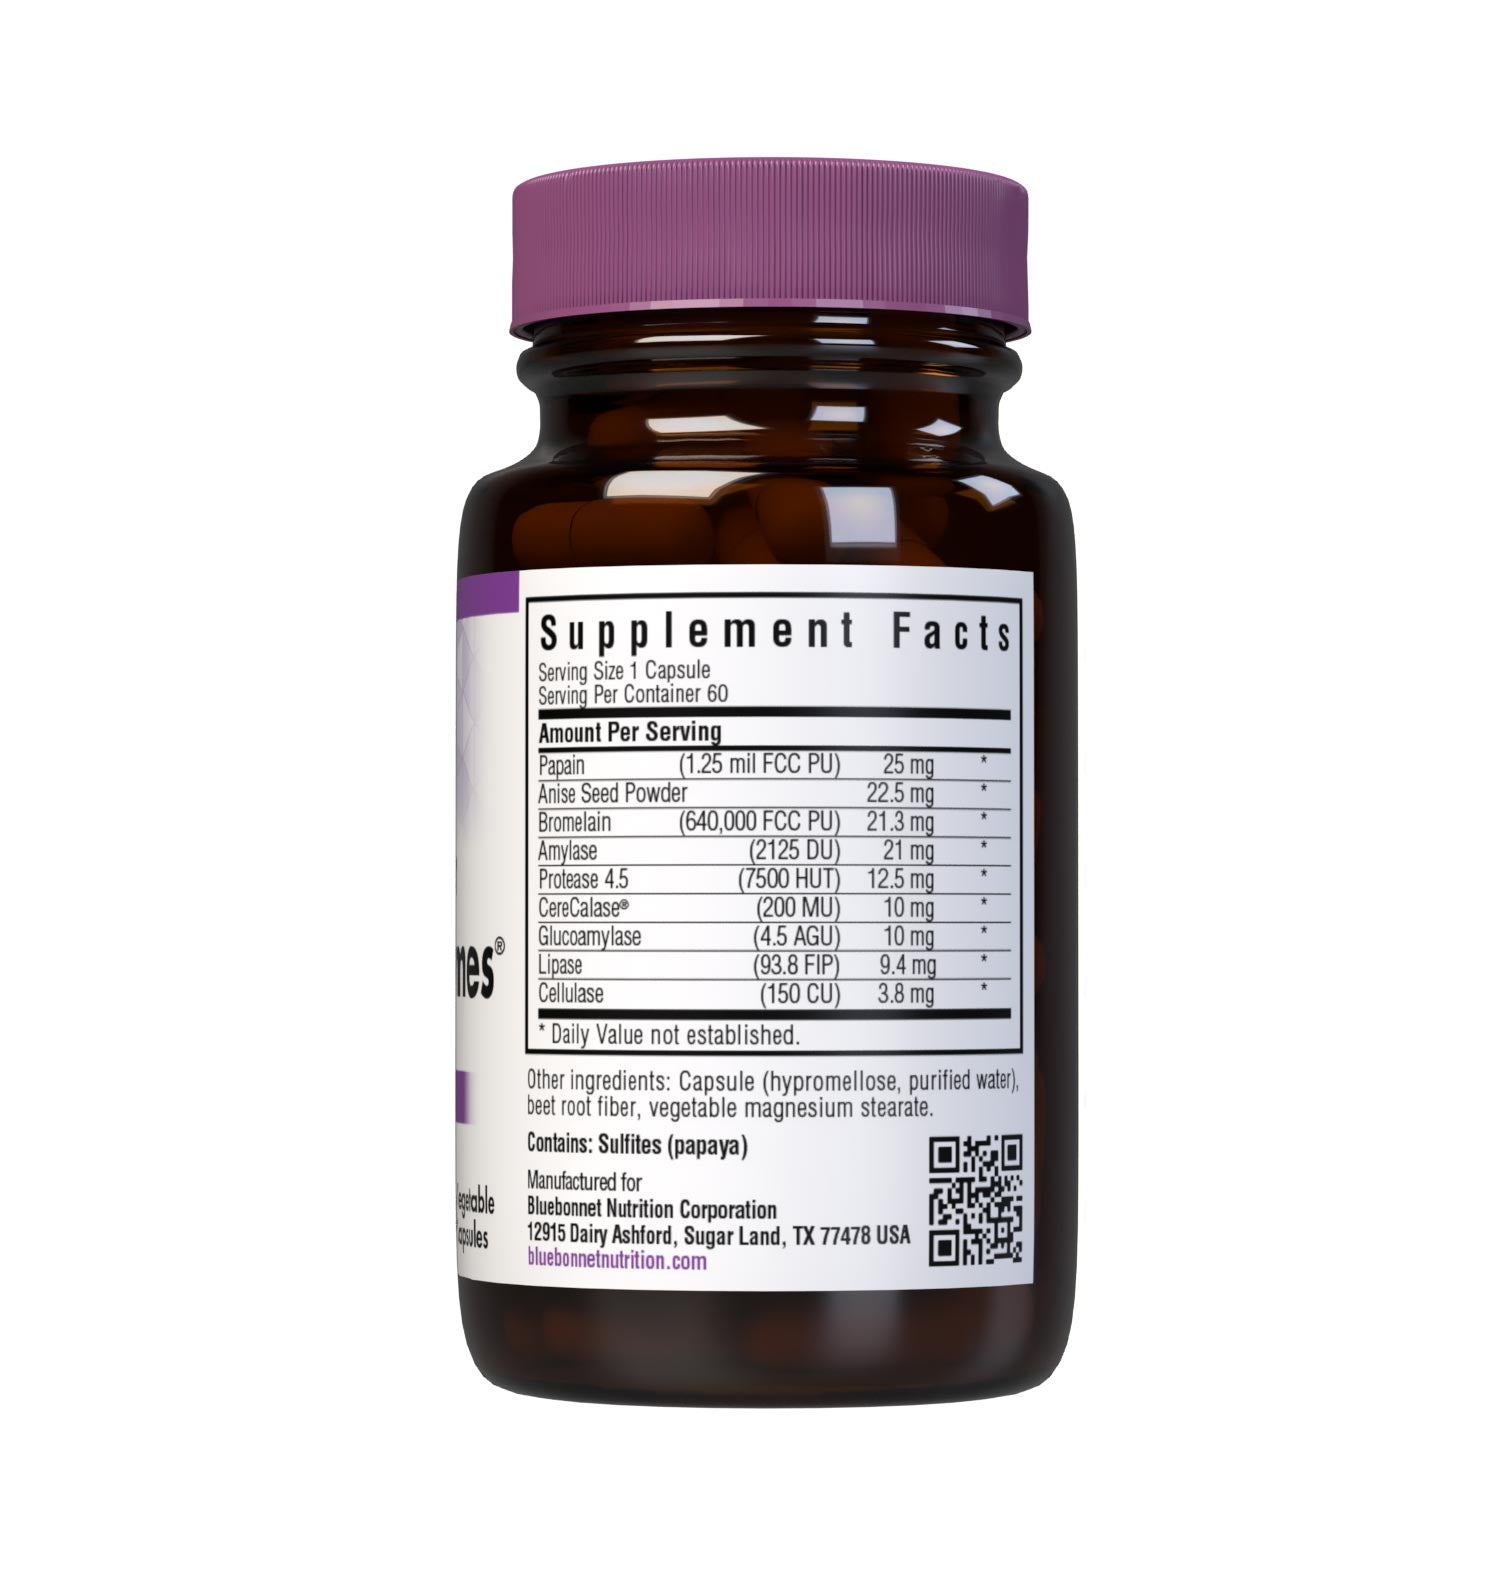 Bluebonnet’s Full Spectrum Optimum Enzymes 60 Vegetable Capsules are formulated with a combination of plant-based enzymes that help support the breakdown of protein, carbohydrates, and fats for digestive health. Supplement facts panel. #size_60 count